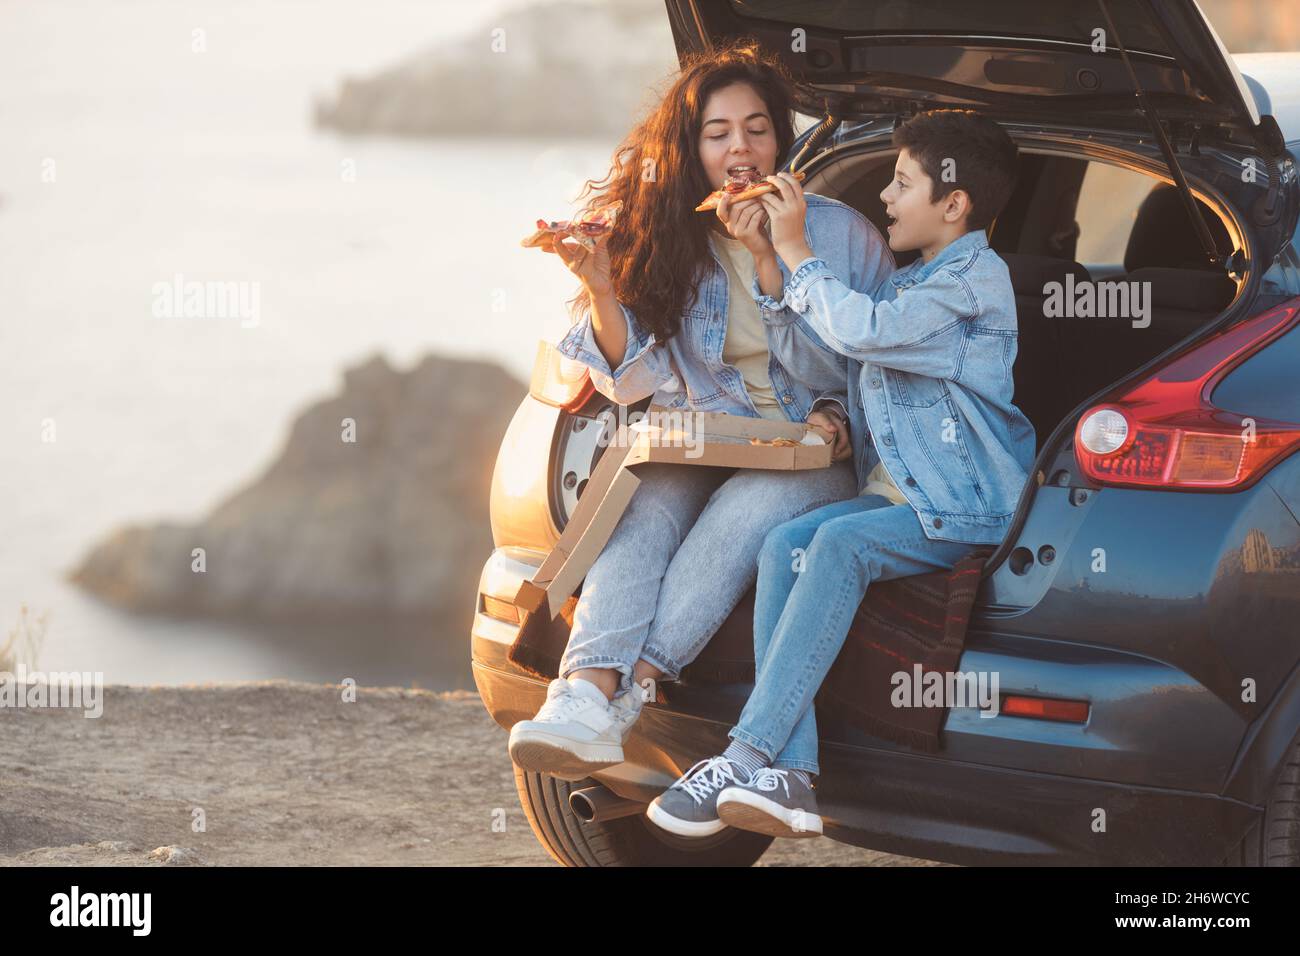 A young mother and her teenage son in denim clothes sitting in the open trunk of a car and eating pizza Stock Photo